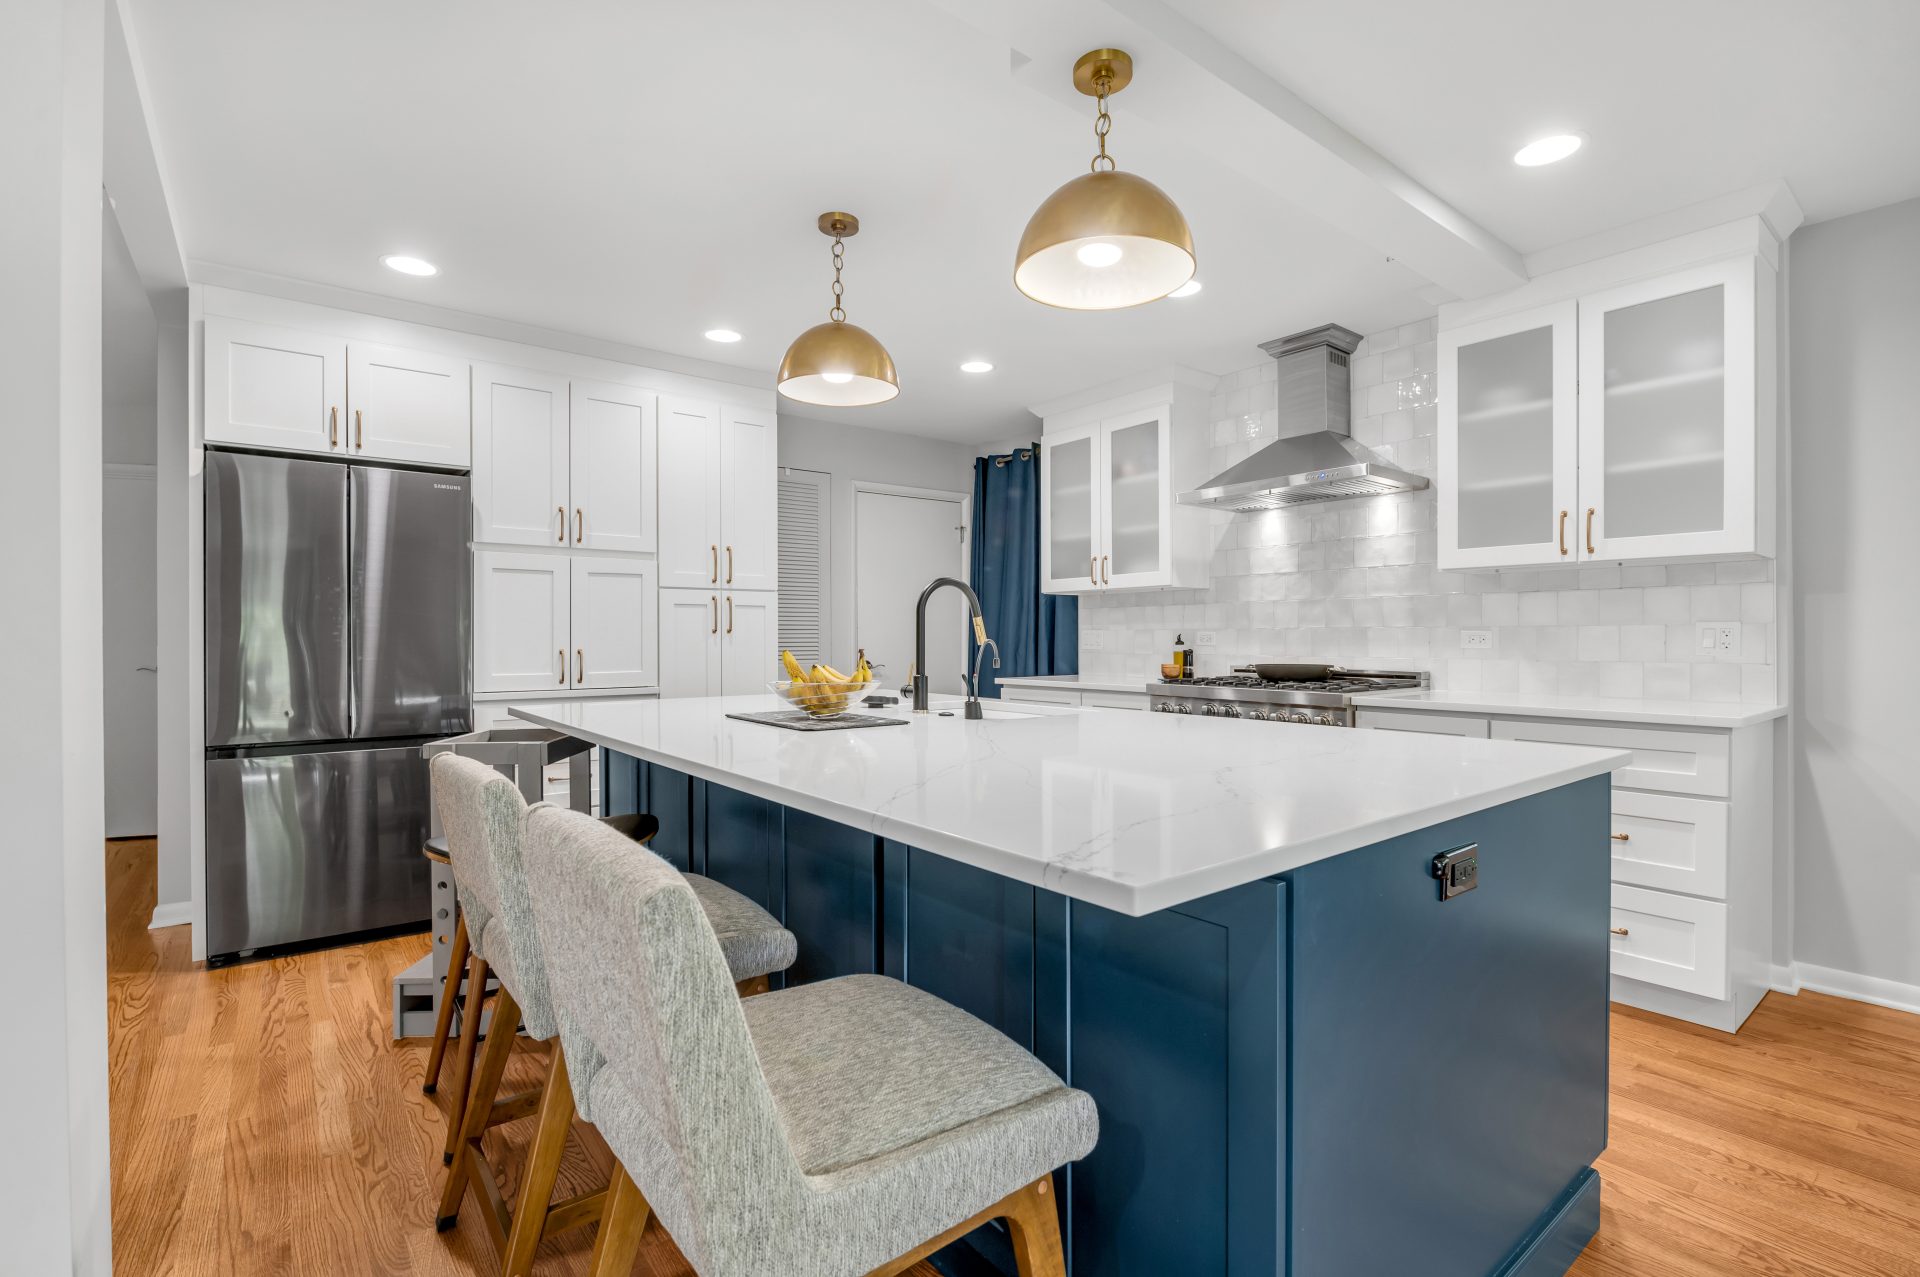 Remodeled kitchen with white square backsplash tiles, white quartz countertop, stainless-steel appliances, exposed stainless steel hood, white and blue two tone cabinets, brass kitchen hardware, two brass kitchen pendants, island sink, and hardwood floors